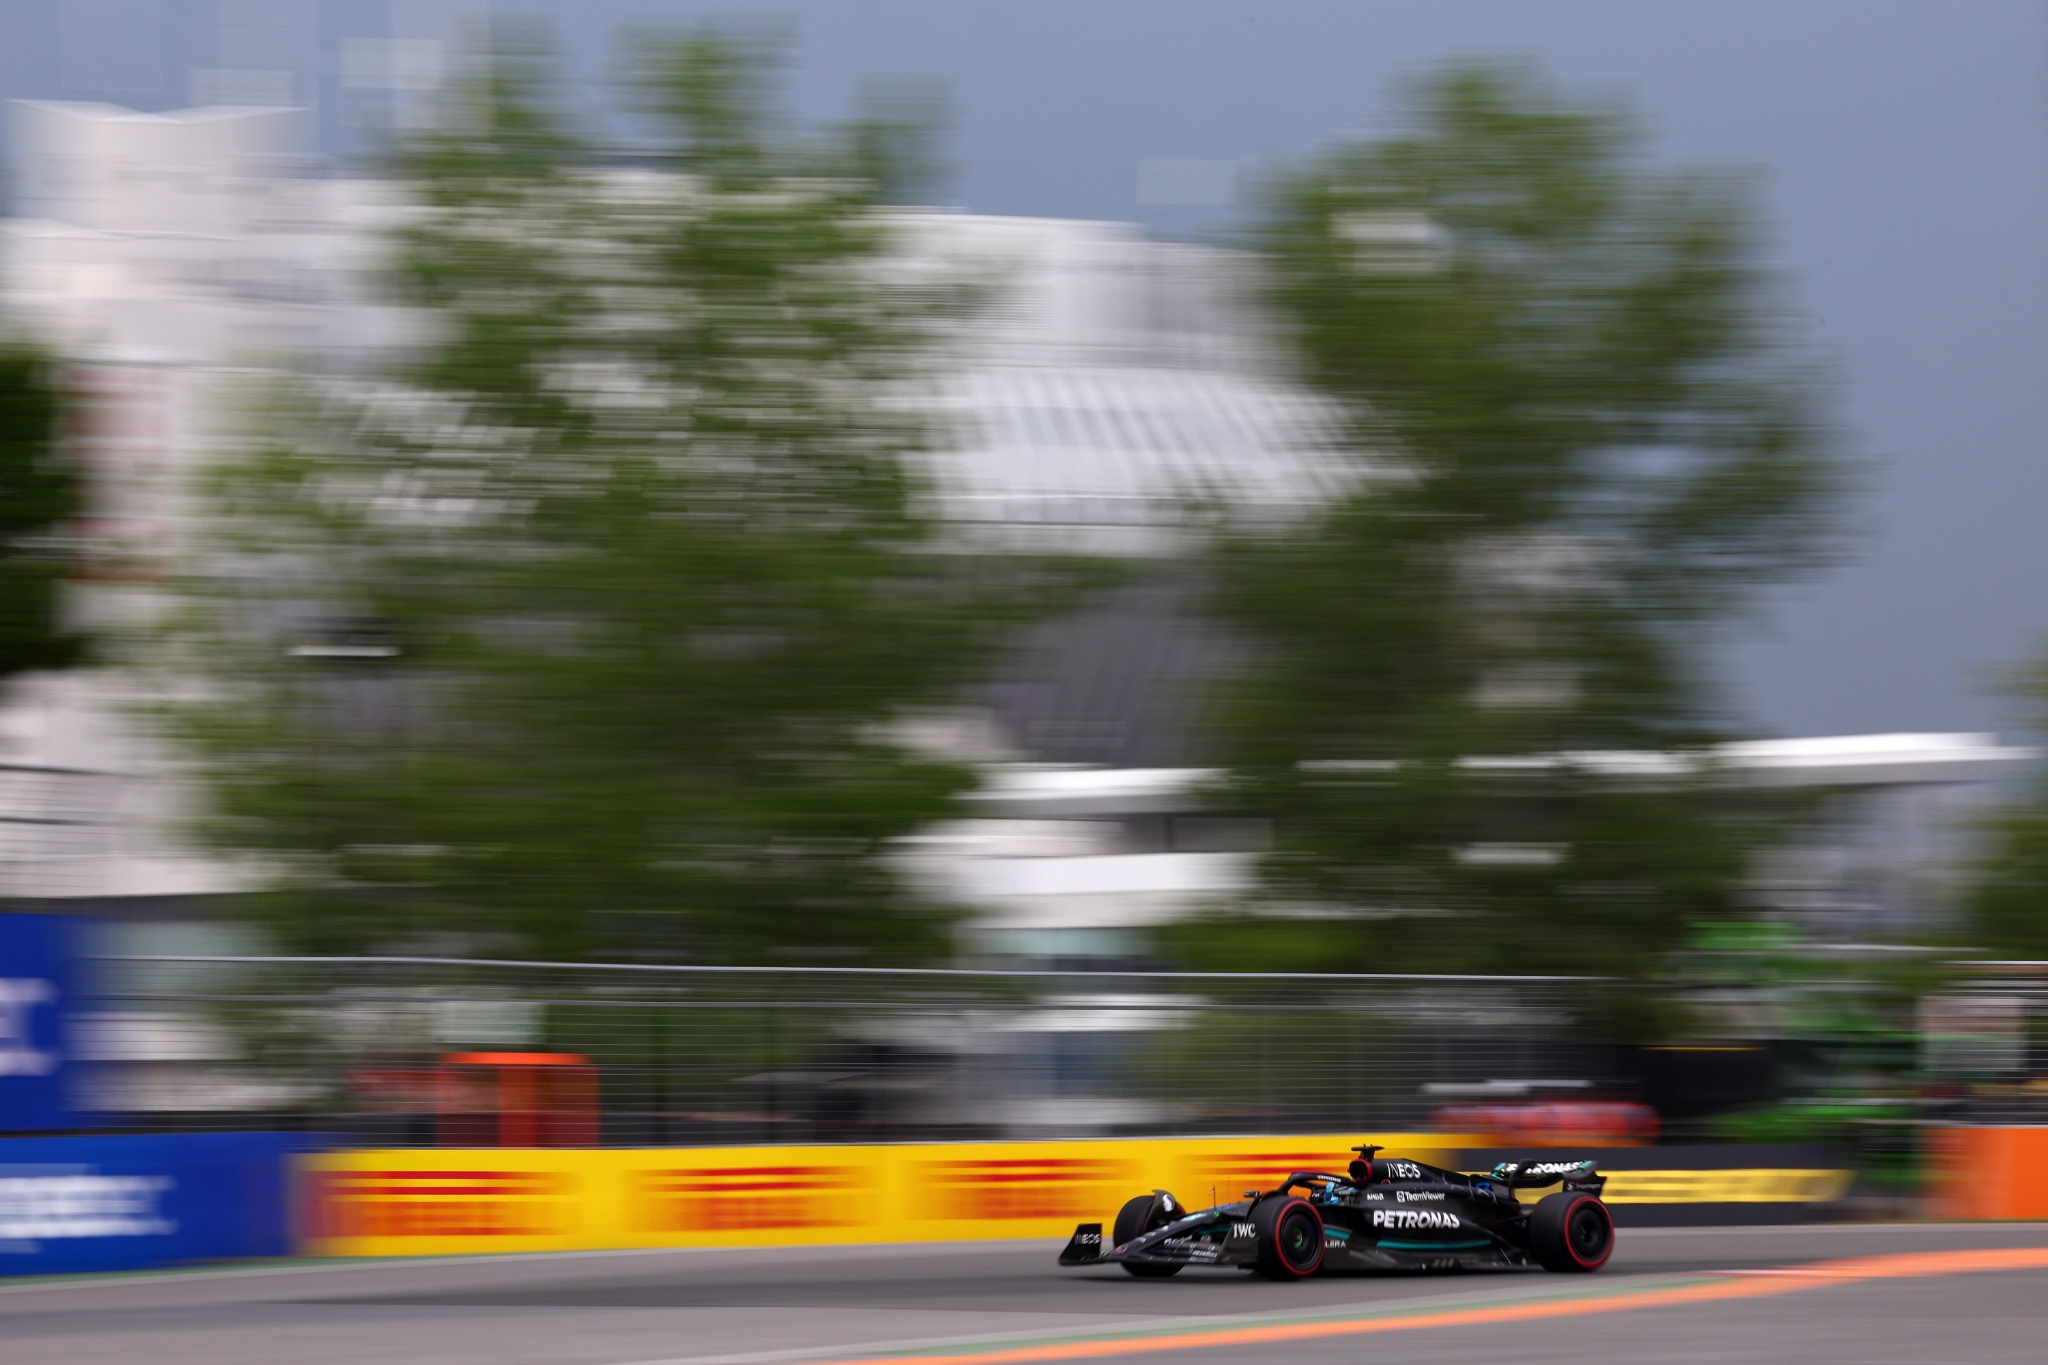 Hamilton and Russell trying to avoid more drama to finish F1 season strong  for Mercedes – KXAN Austin